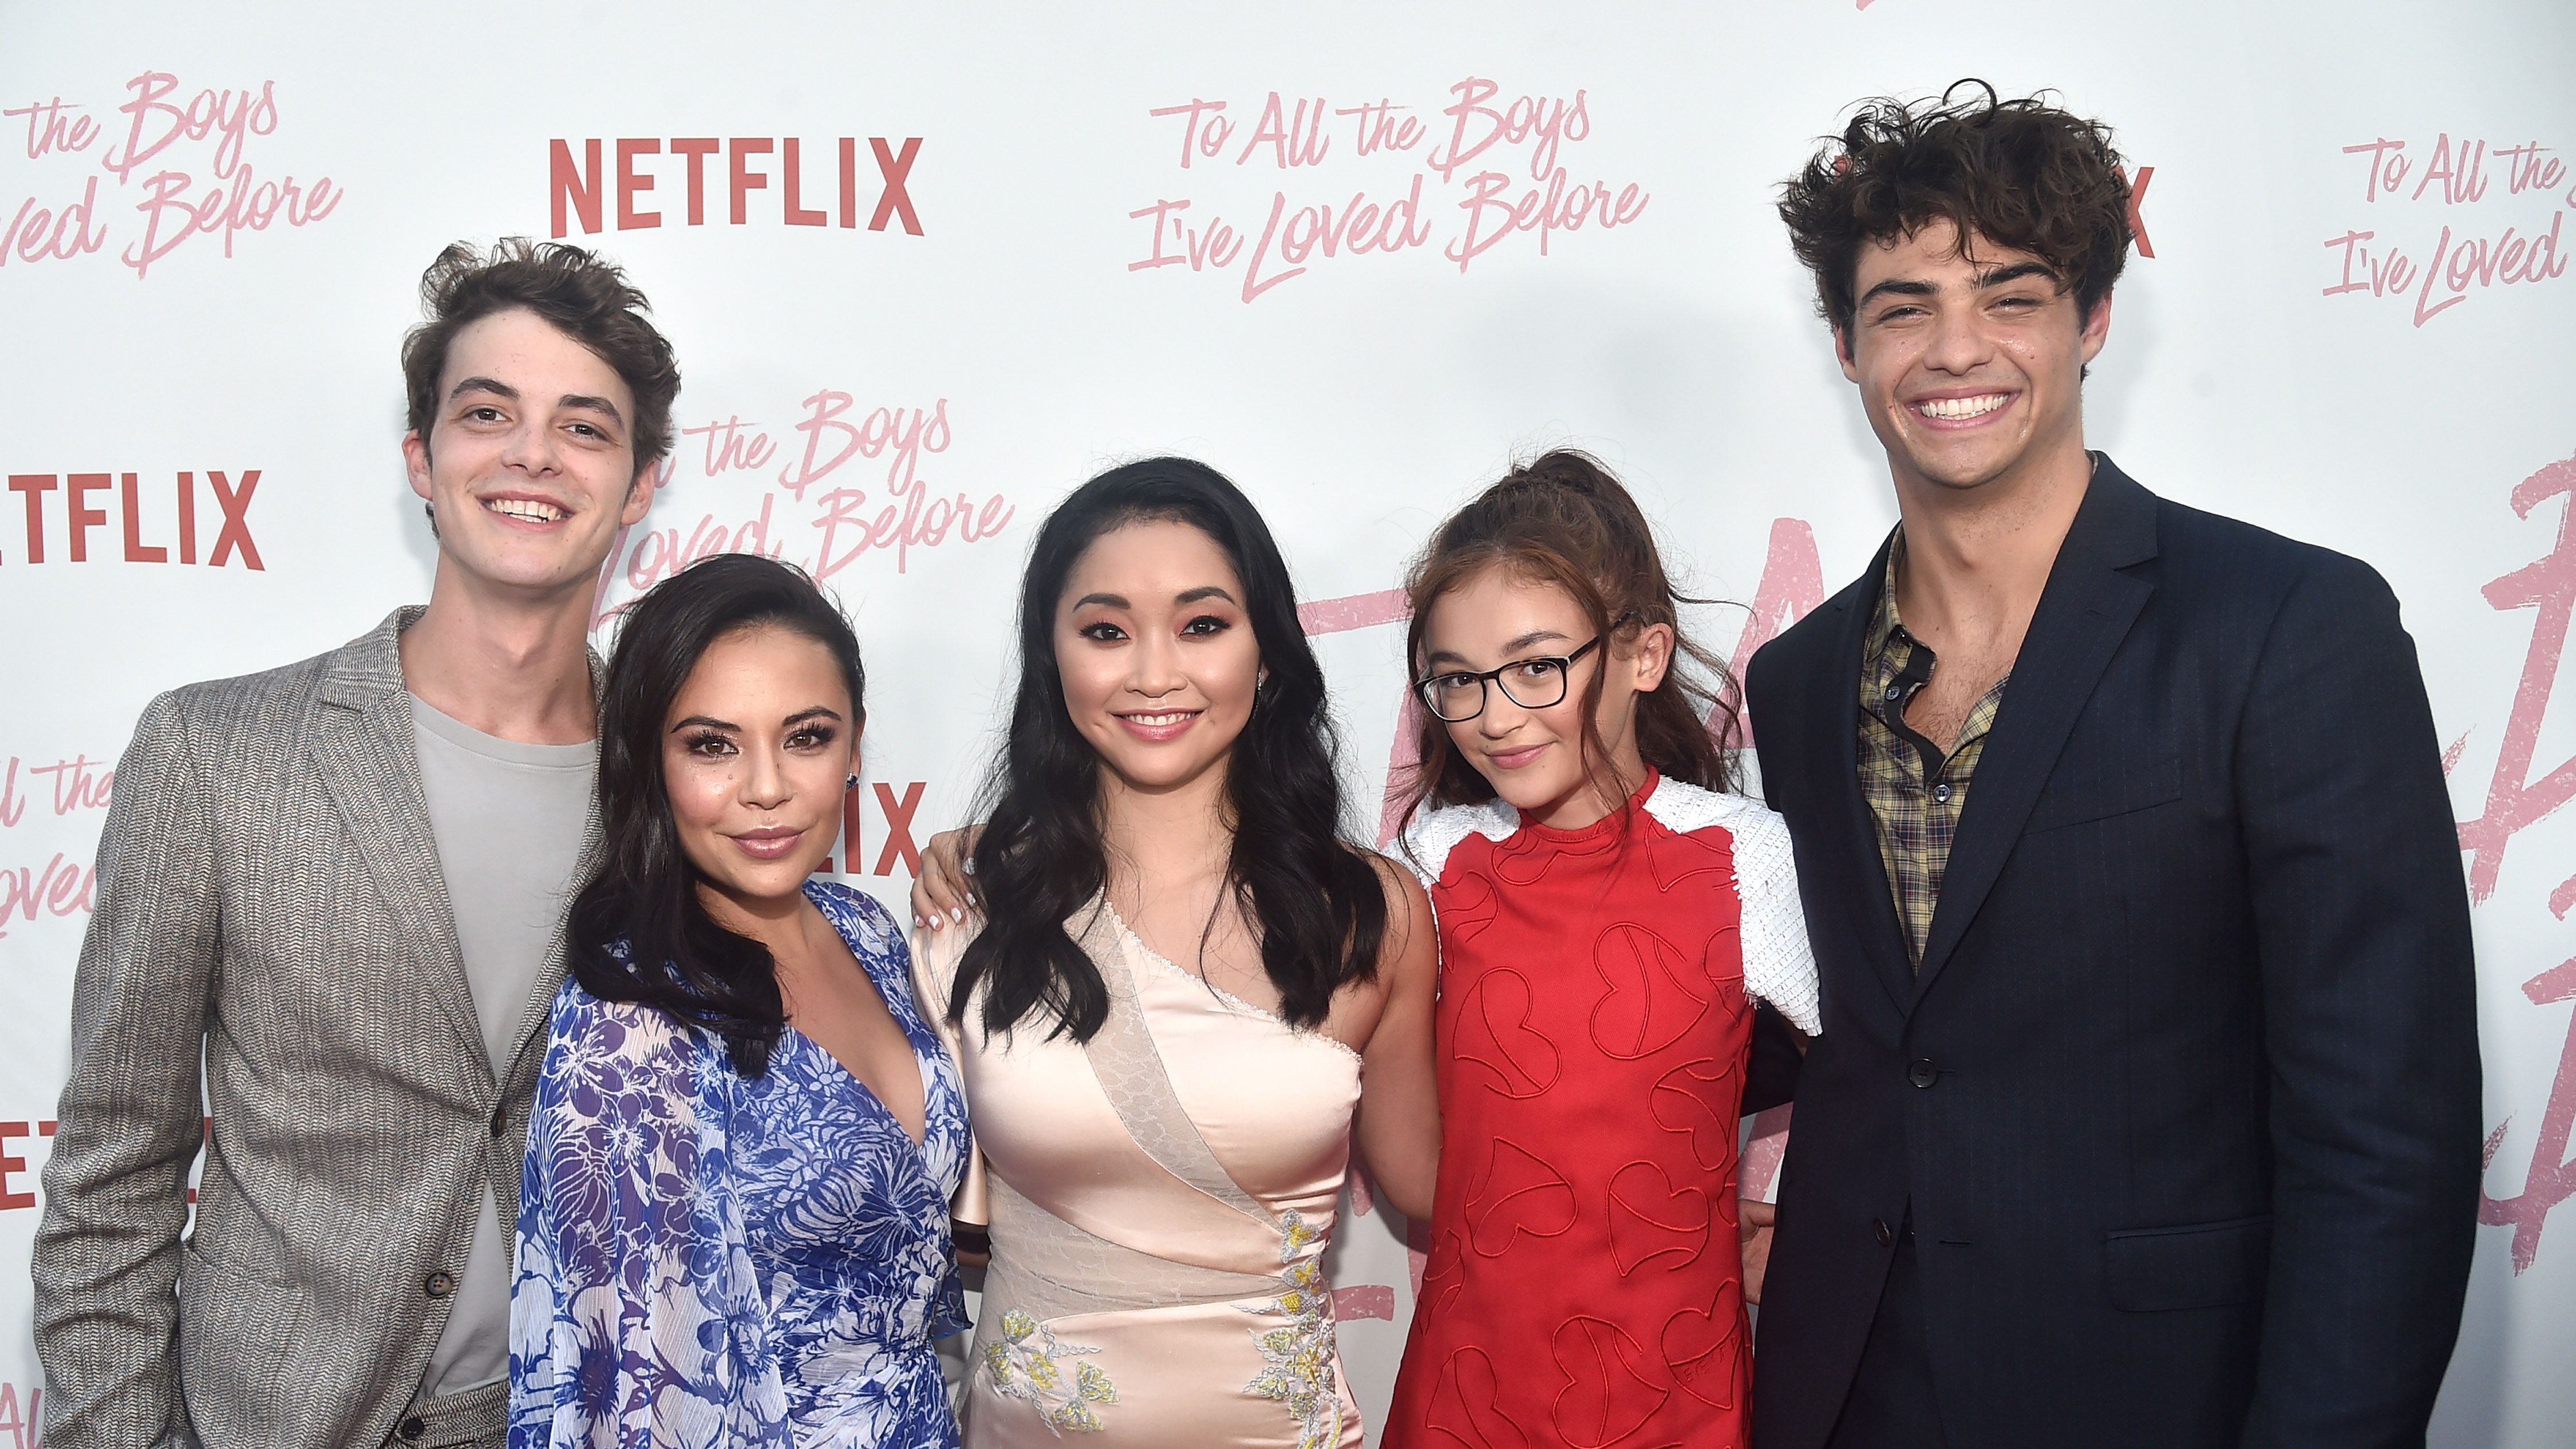 To Every You I've Loved Before movie: Release date, trailer